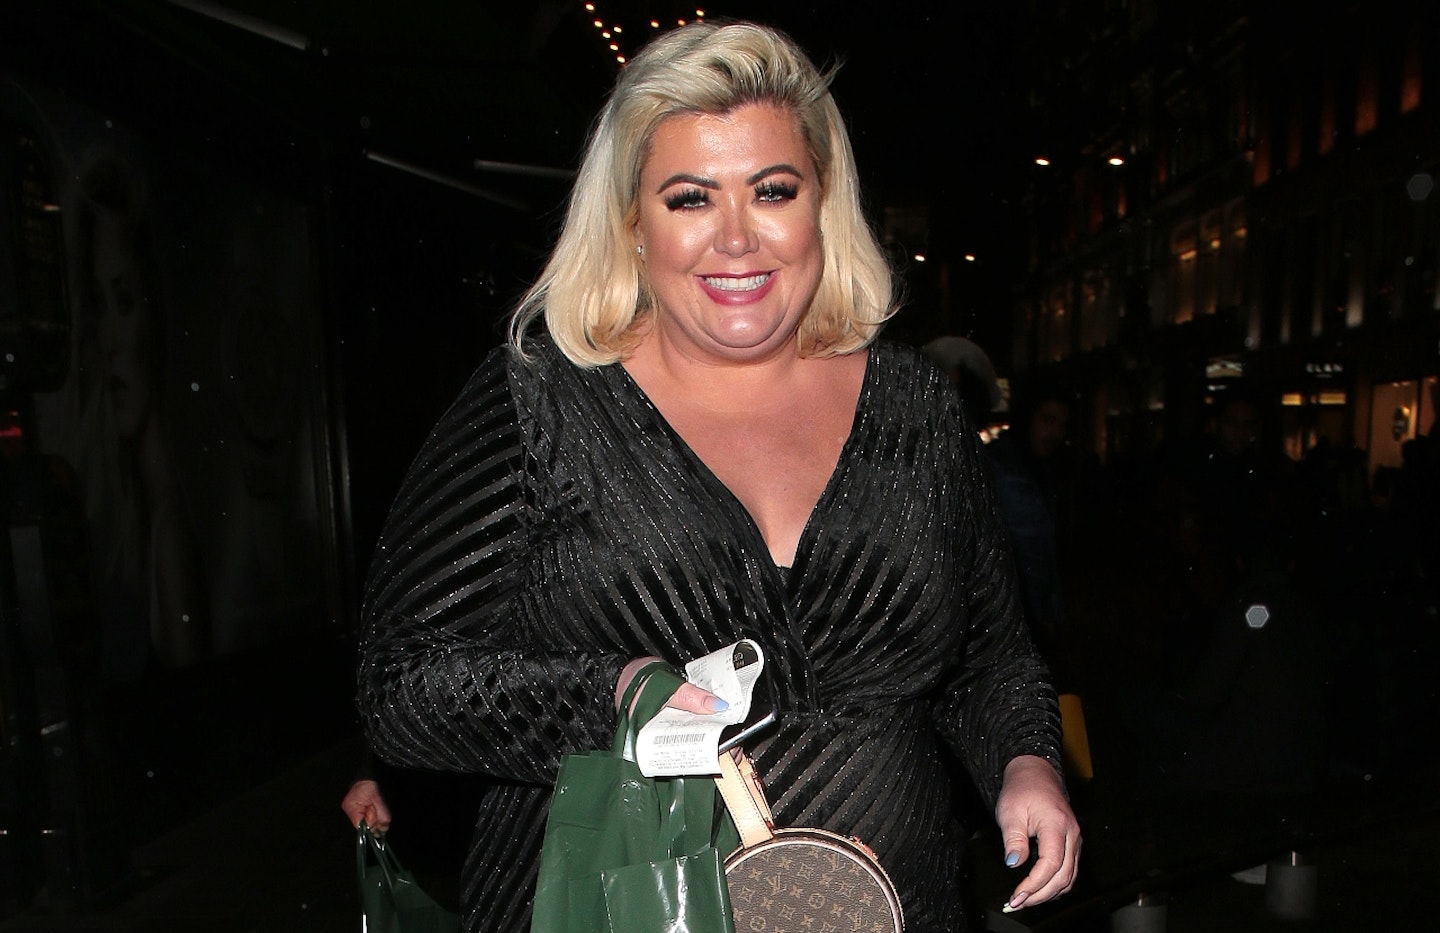 TOWIE's Gemma Collins to release meme based clothing line